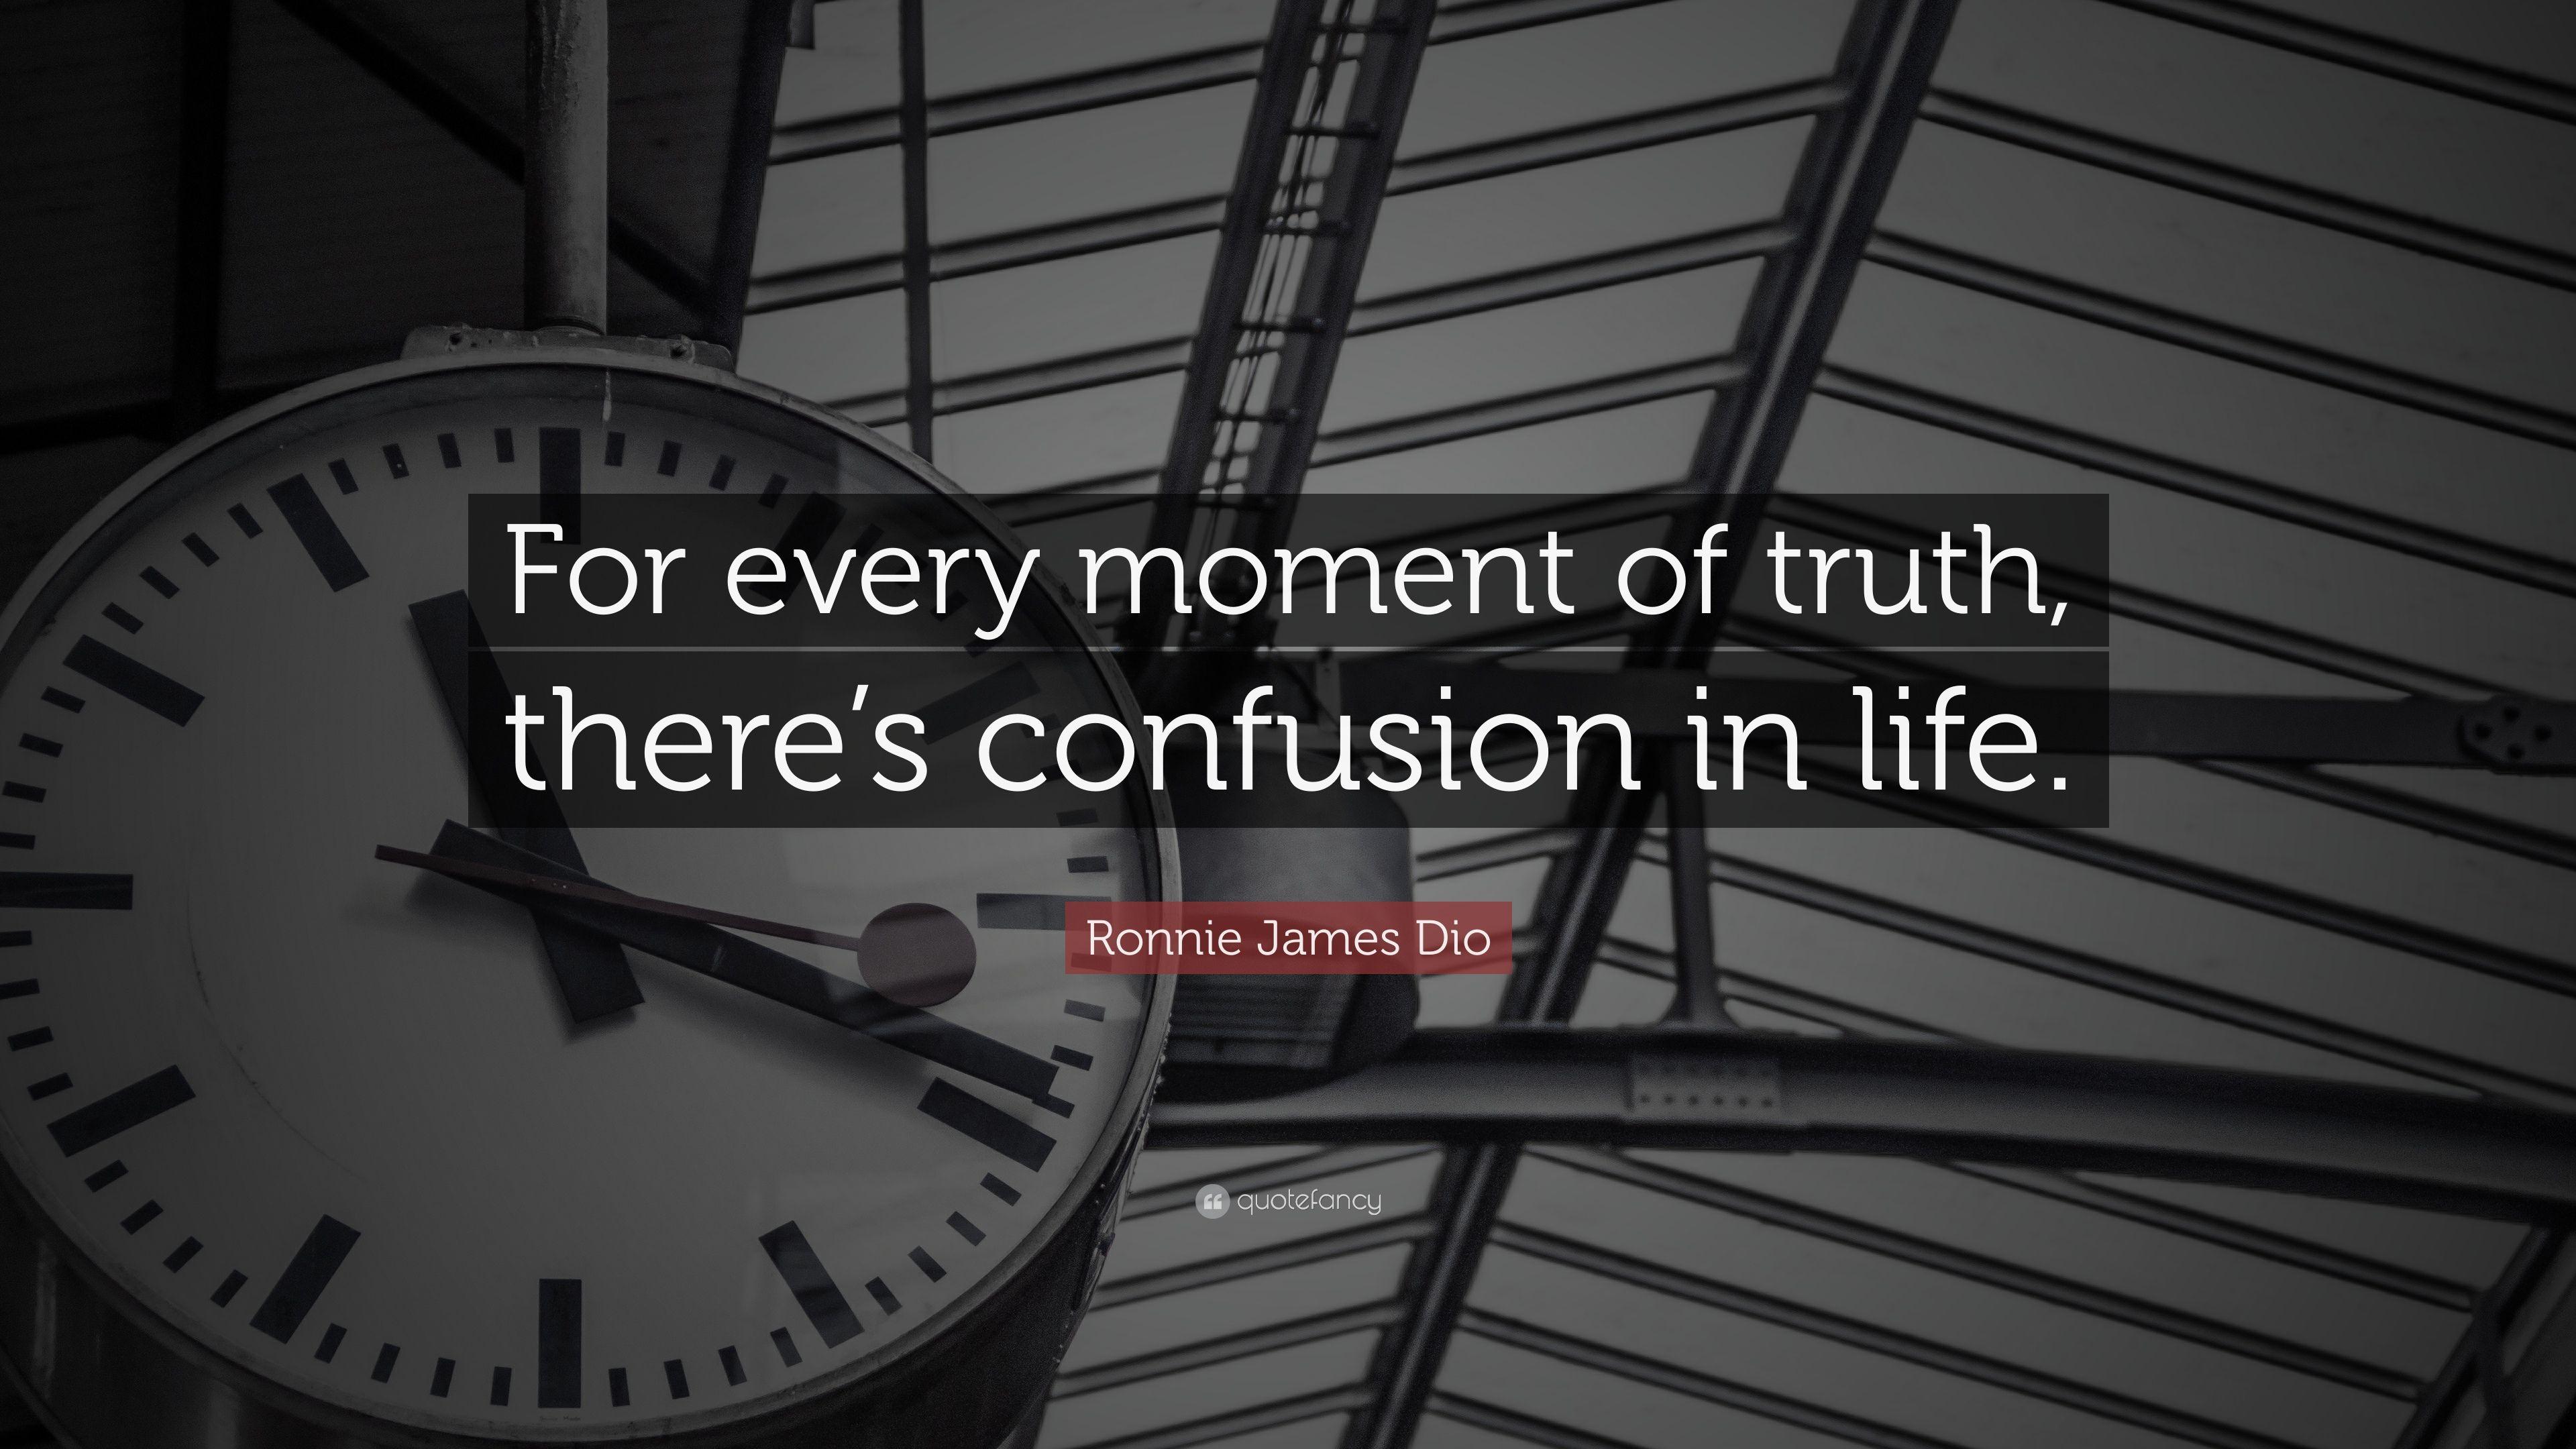 Ronnie James Dio Quote: “For every moment of truth, there's